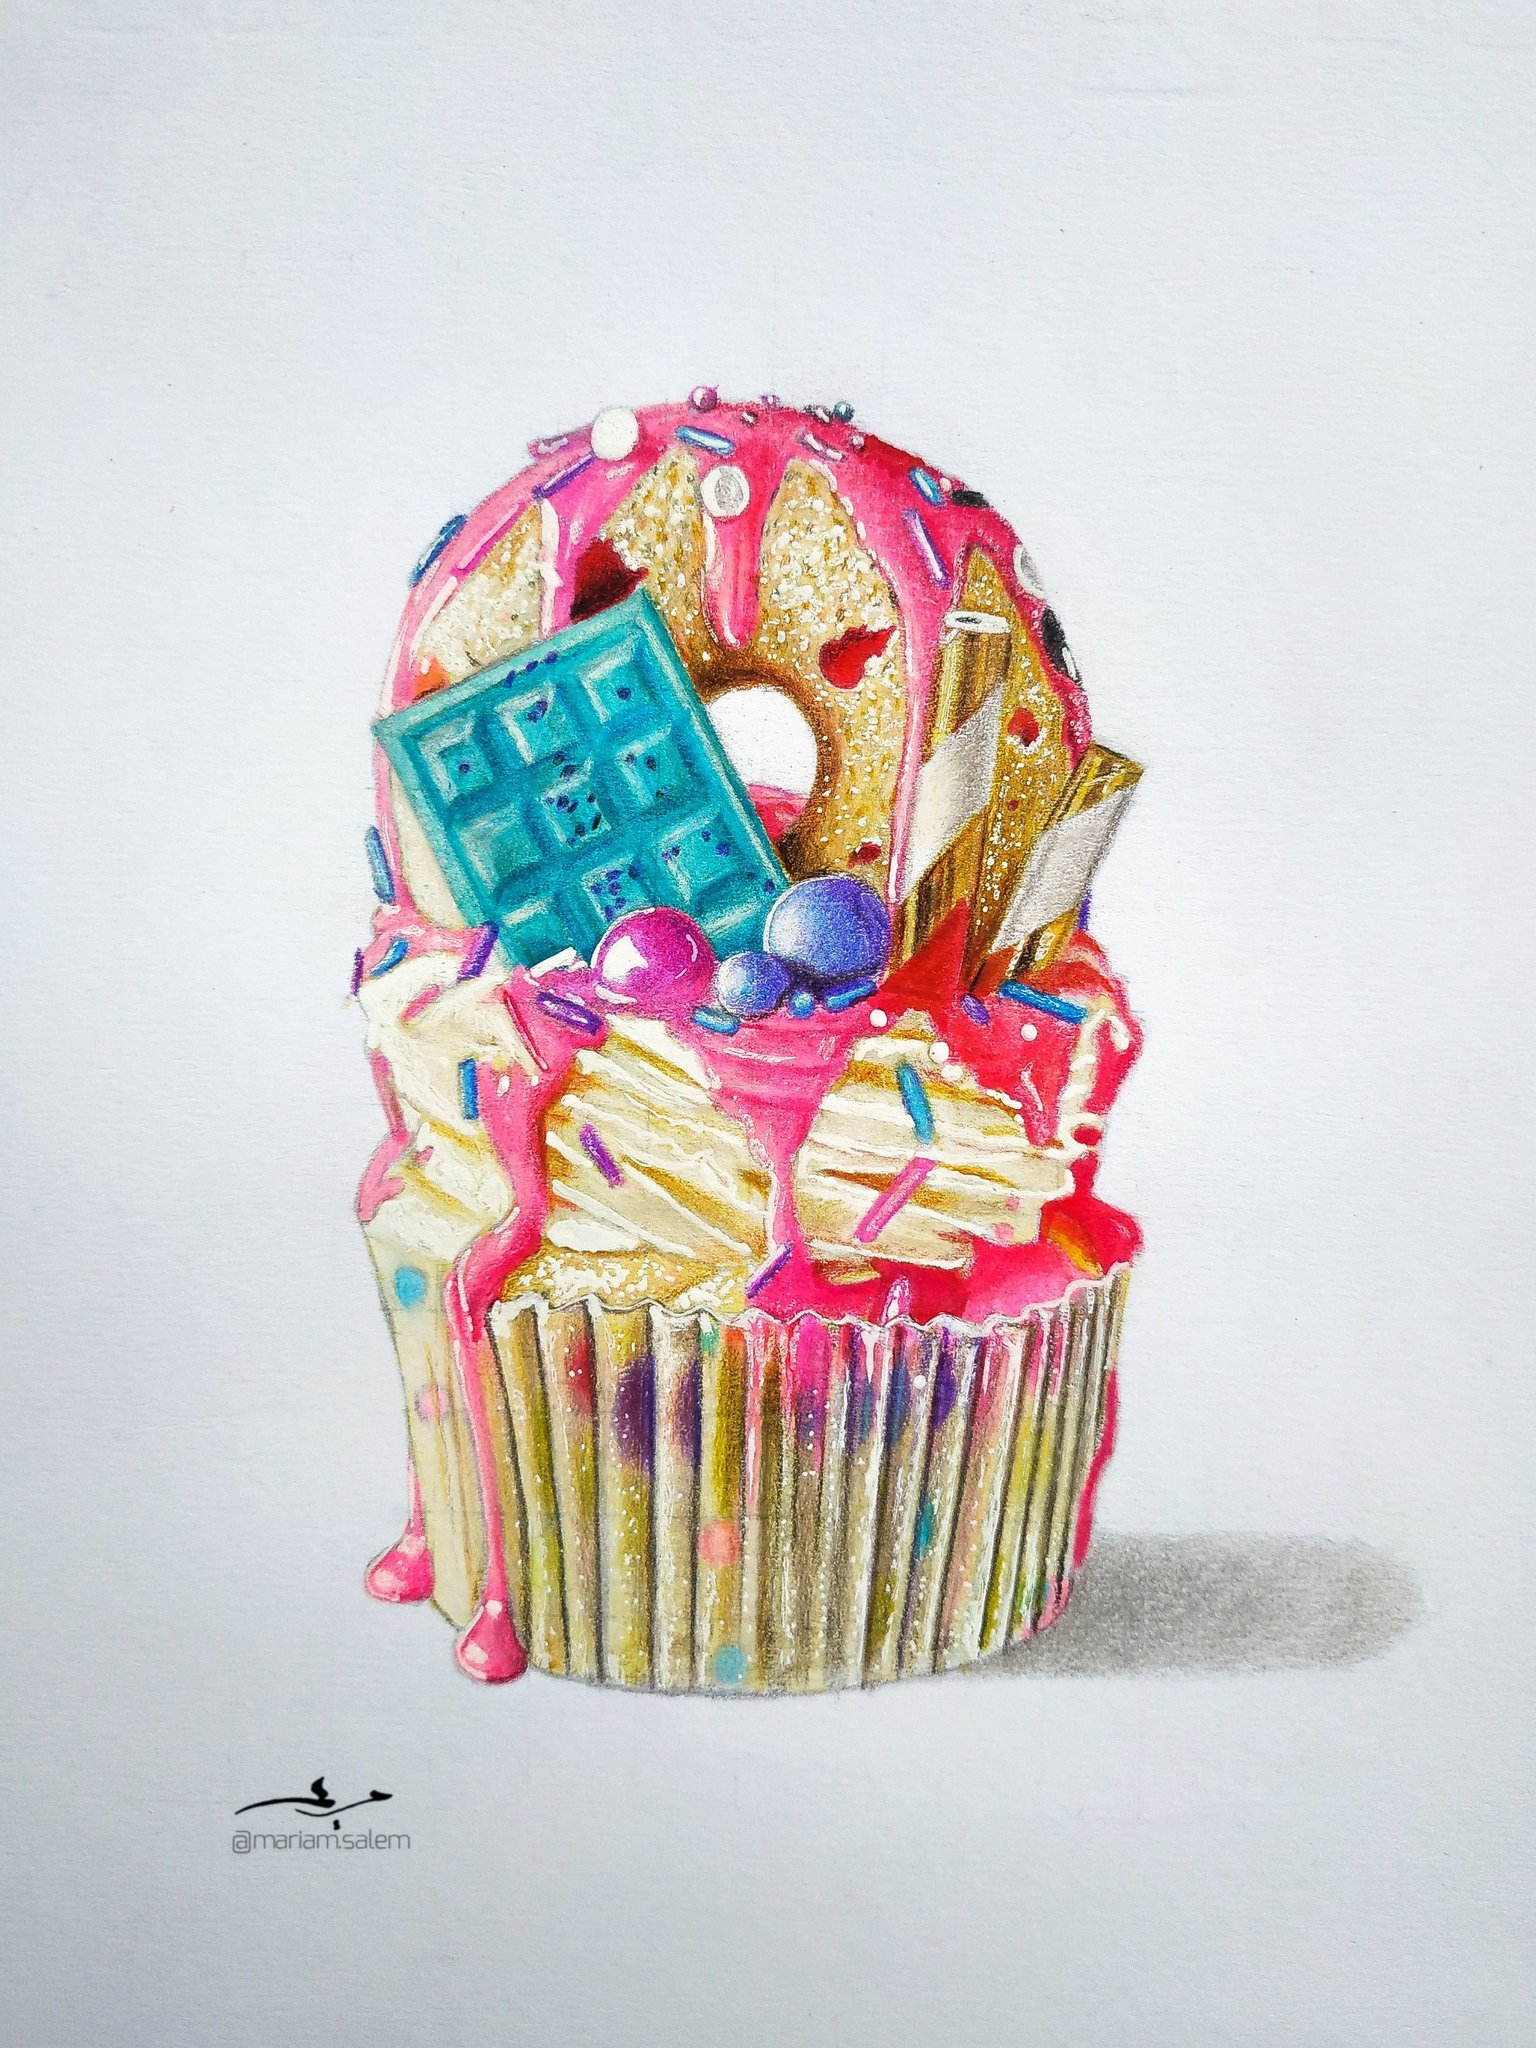 How To Draw A Cupcake, Step by Step, Drawing Guide, by art928 - DragoArt